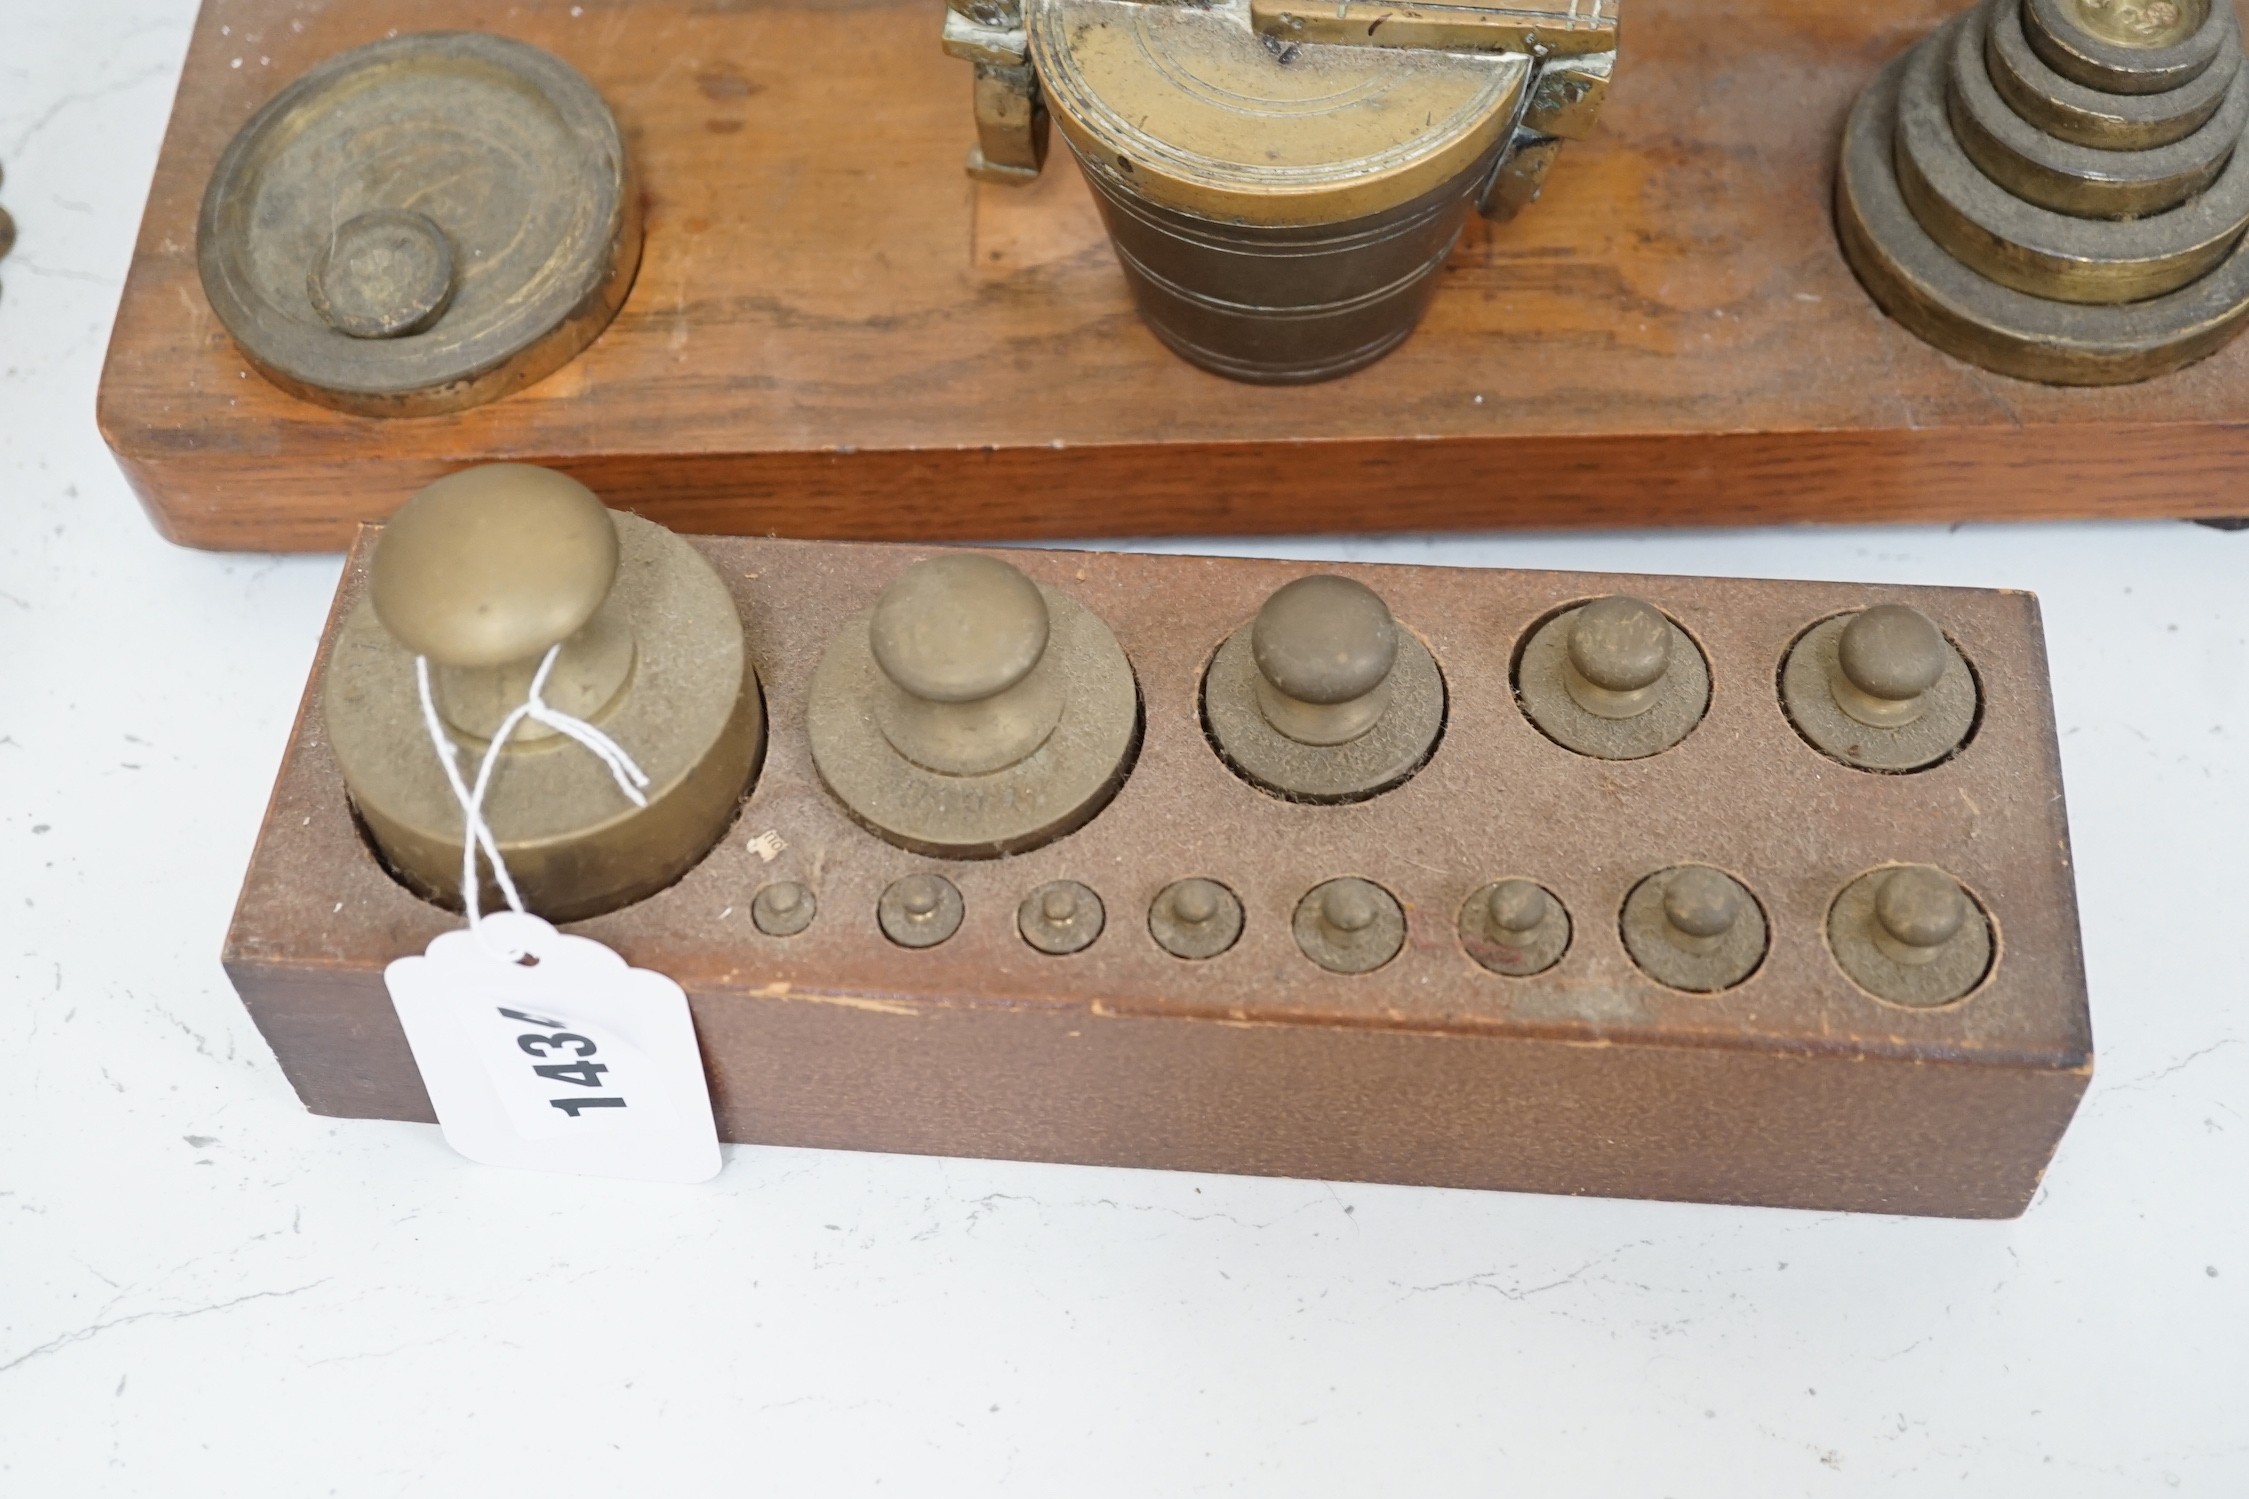 A set of brass postal scales and weights, a separate set of weights and another, set in wooden stand